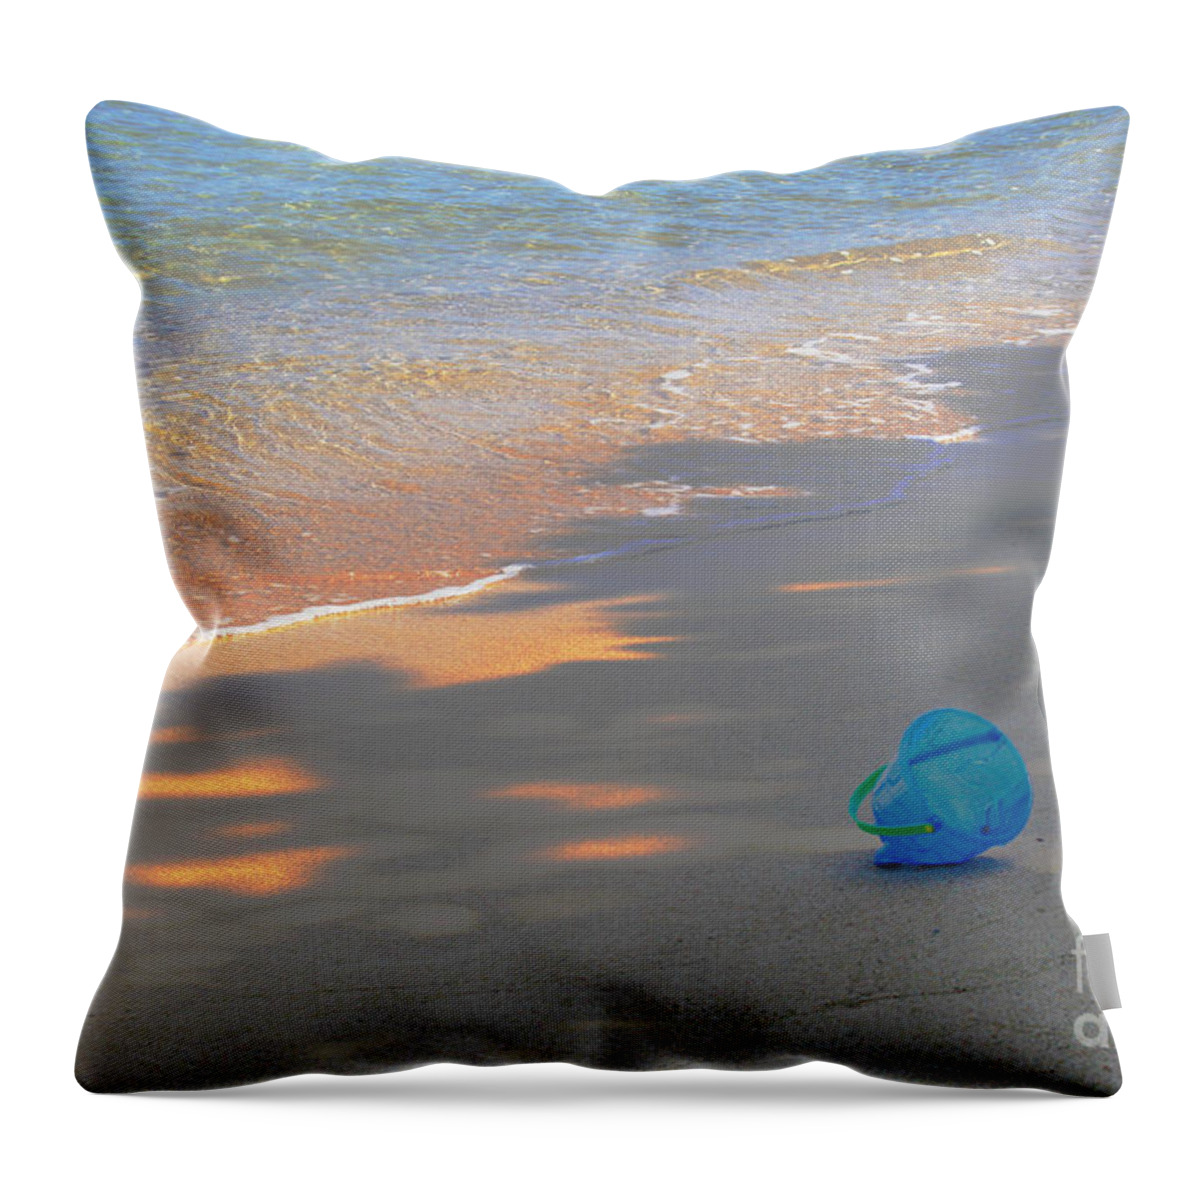 Sea Throw Pillow featuring the photograph Blue Bucket by Jeanette French